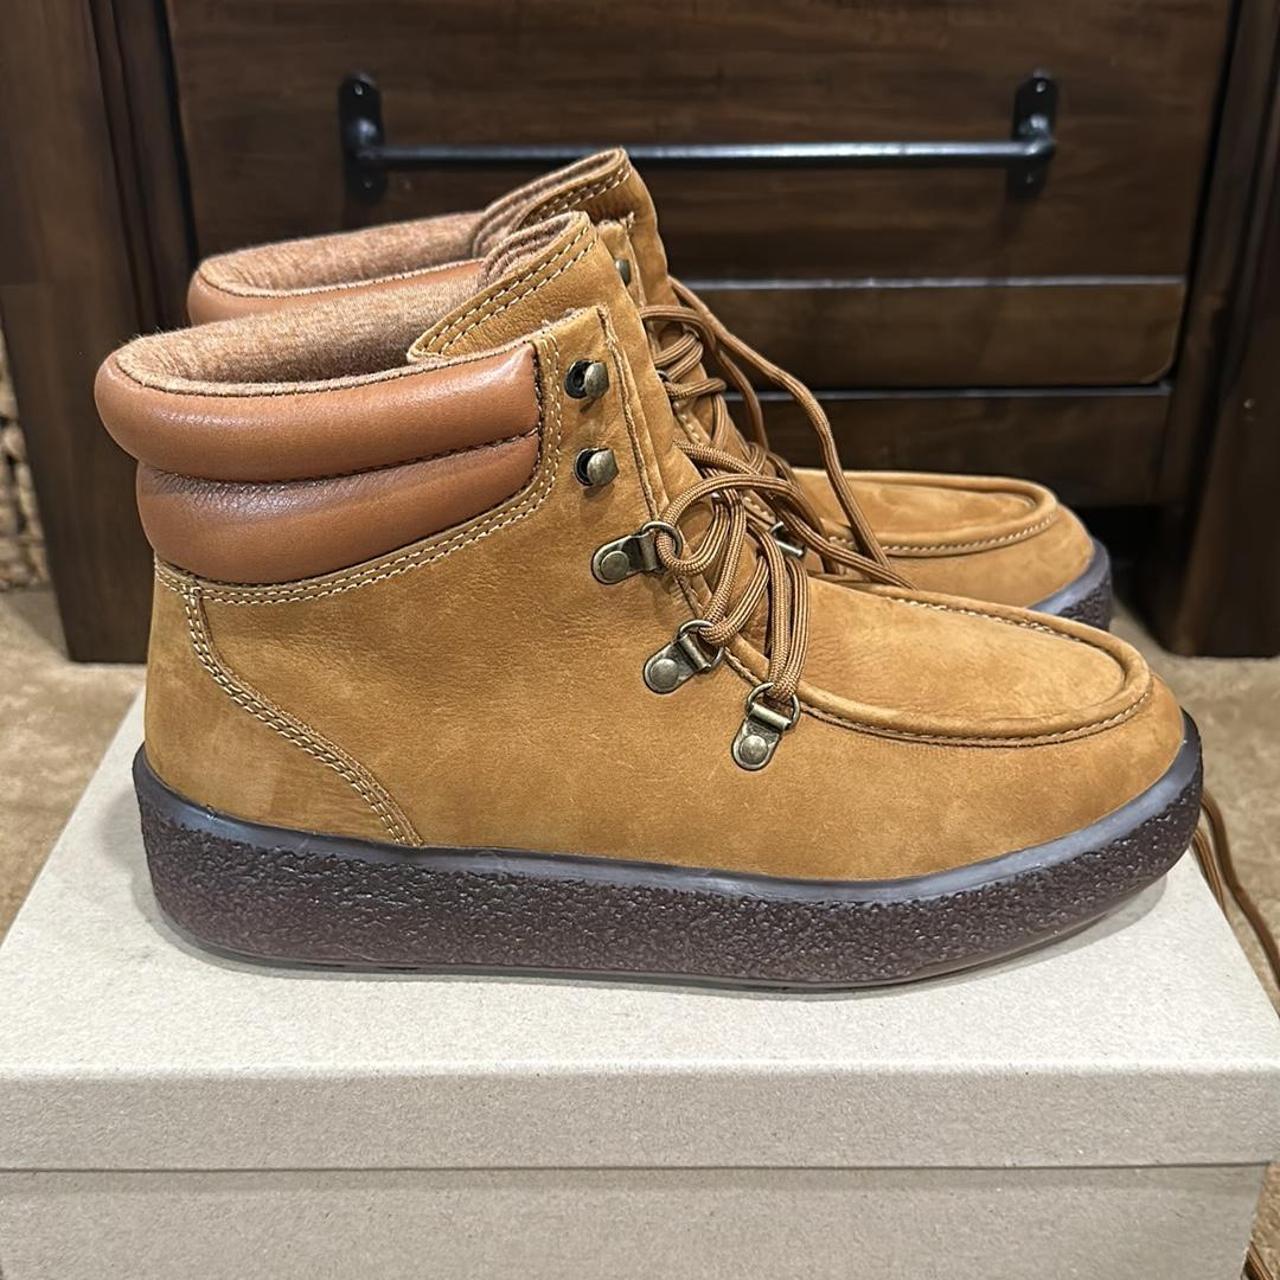 Brand new in box Madewell Carsen Lace-Up Boots! $198... - Depop